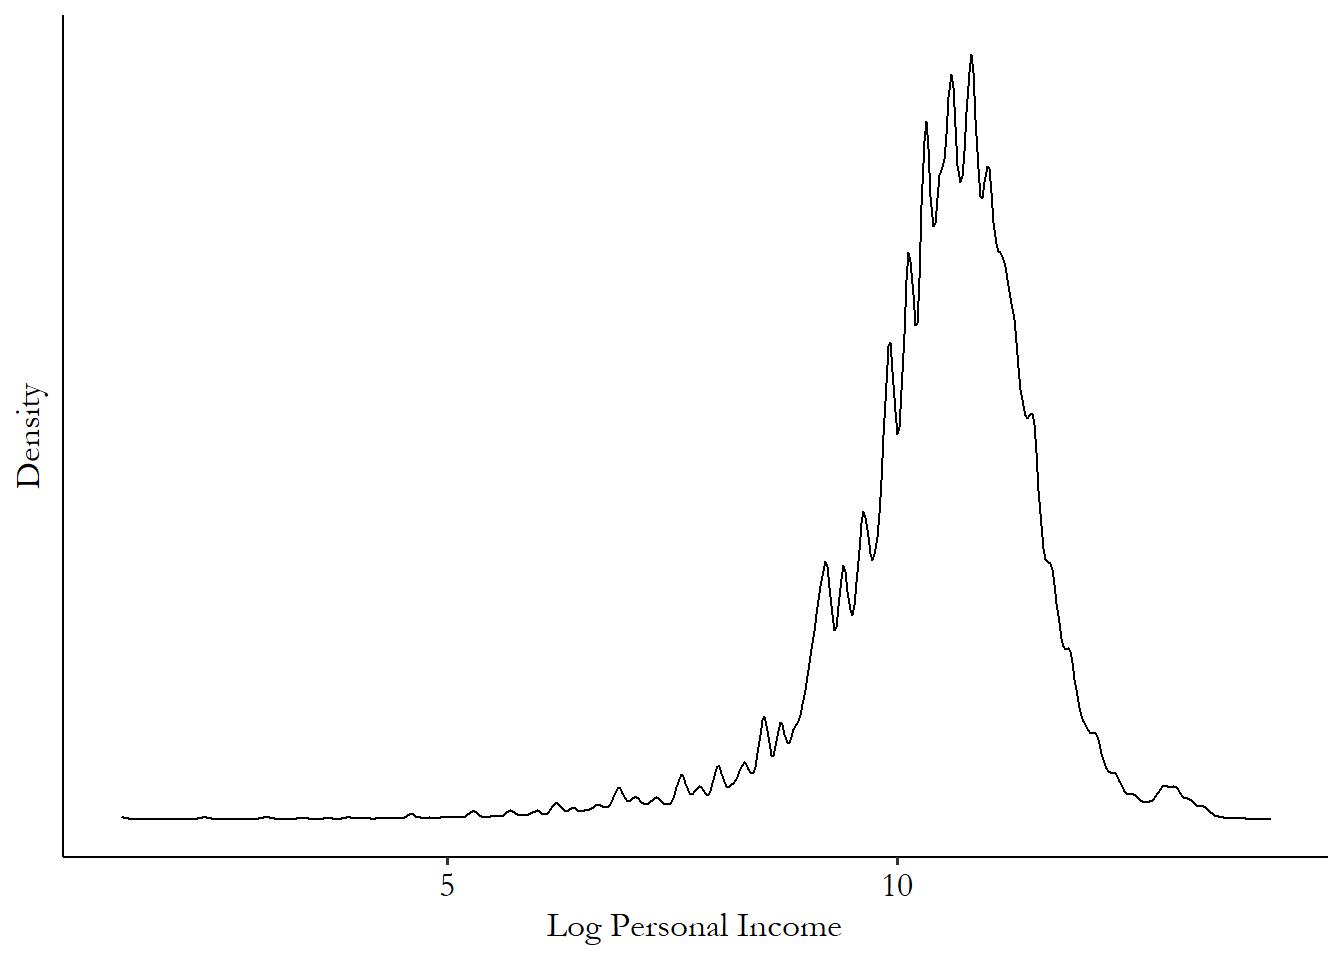 Density plot of personal income in the 2018 American Community Survey after taking the logarithm, showing a roughly normal distribution